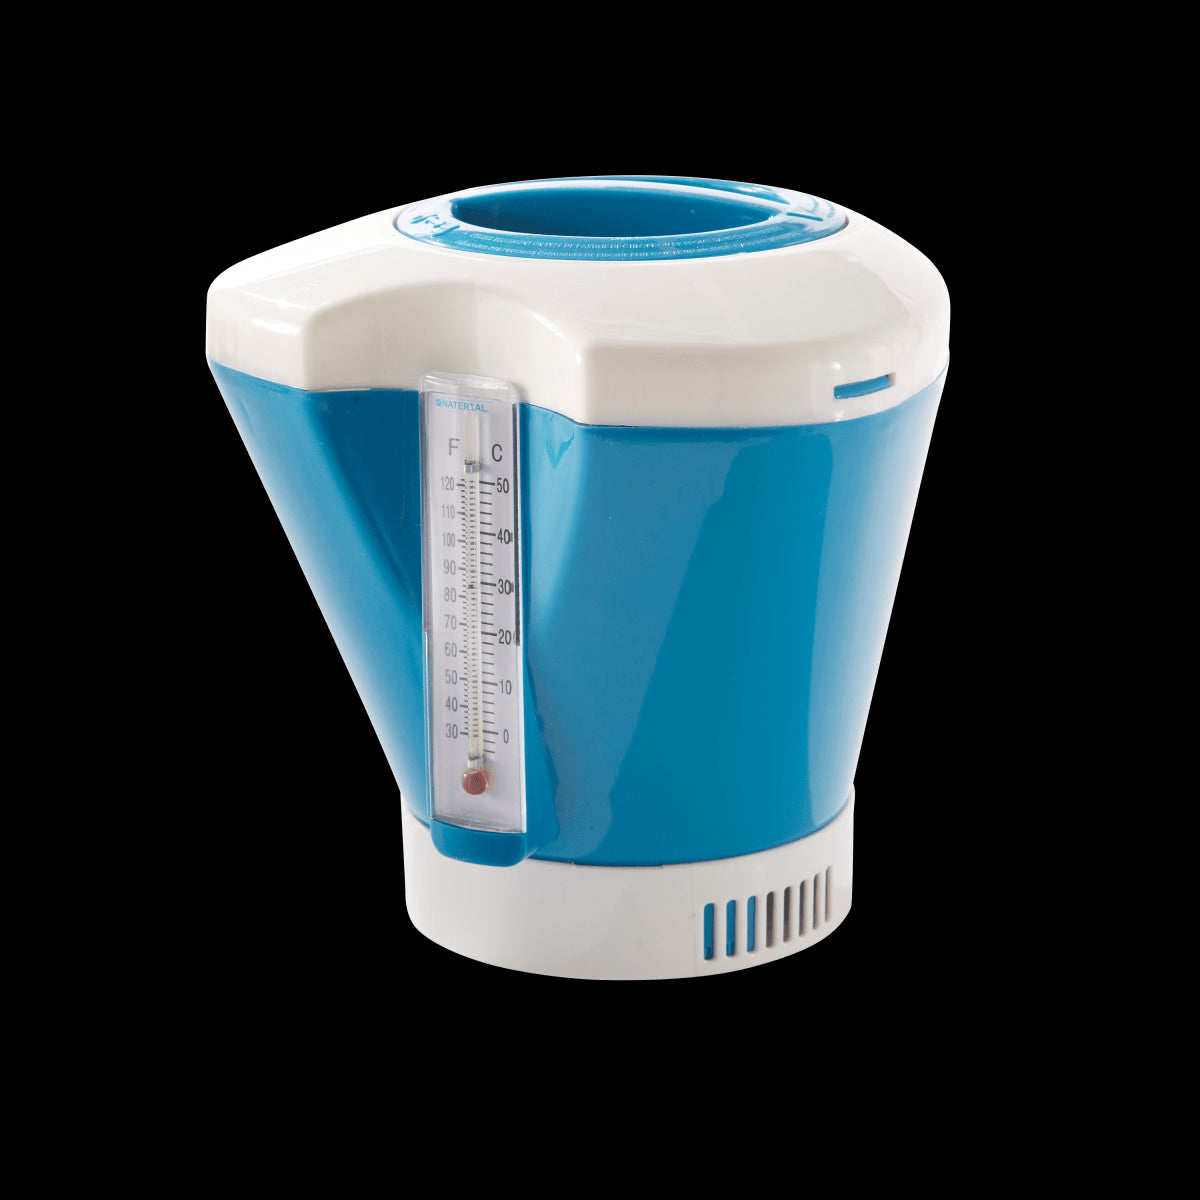 200 G CHLORINE DISPENSER WITH BUILT-IN THERMOMETER NATERIAL